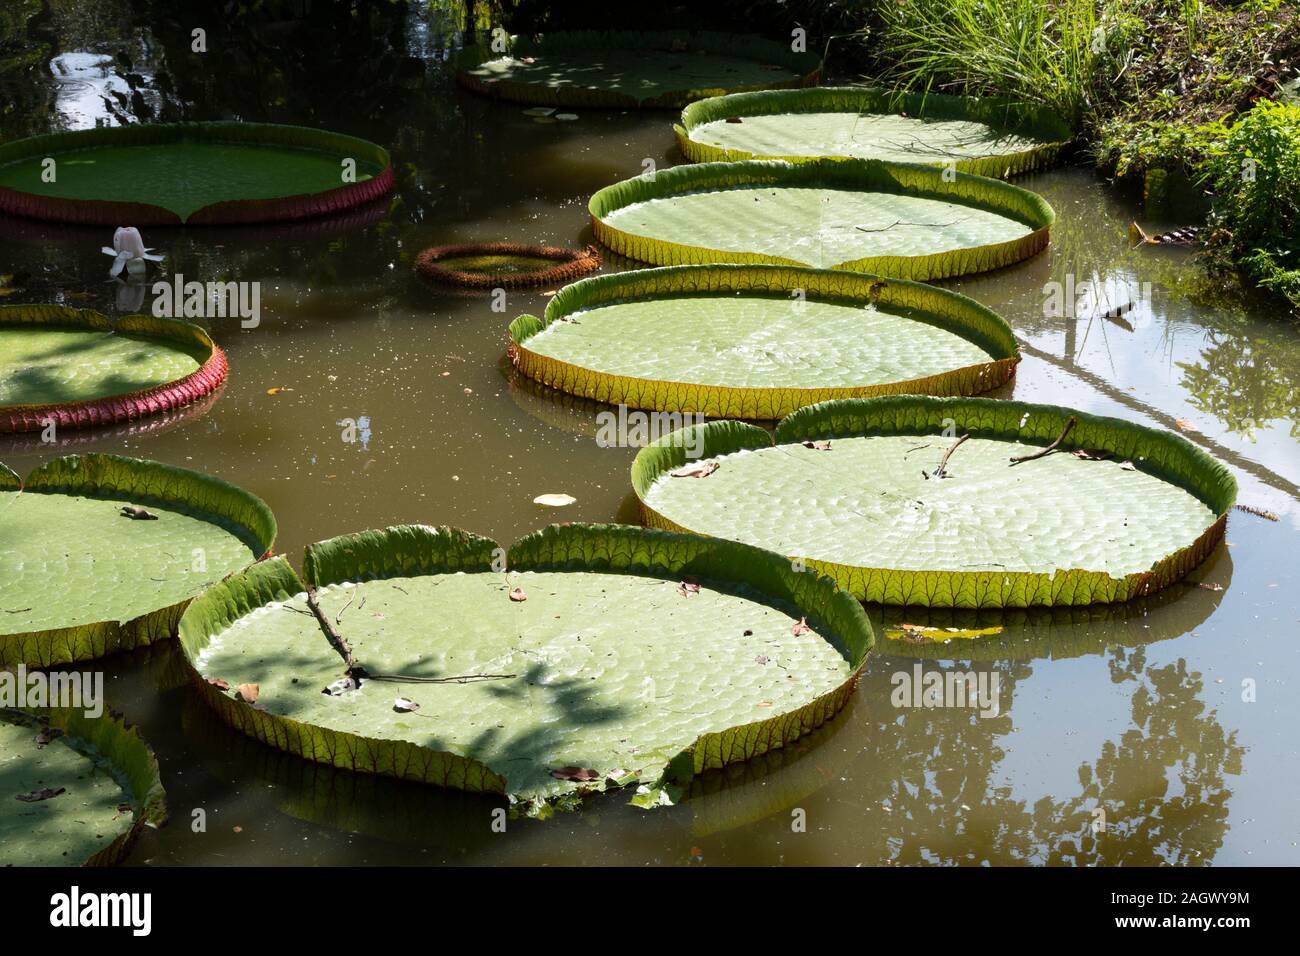 Giant water lily pads, Chiang Mai, Thailand Stock Photo